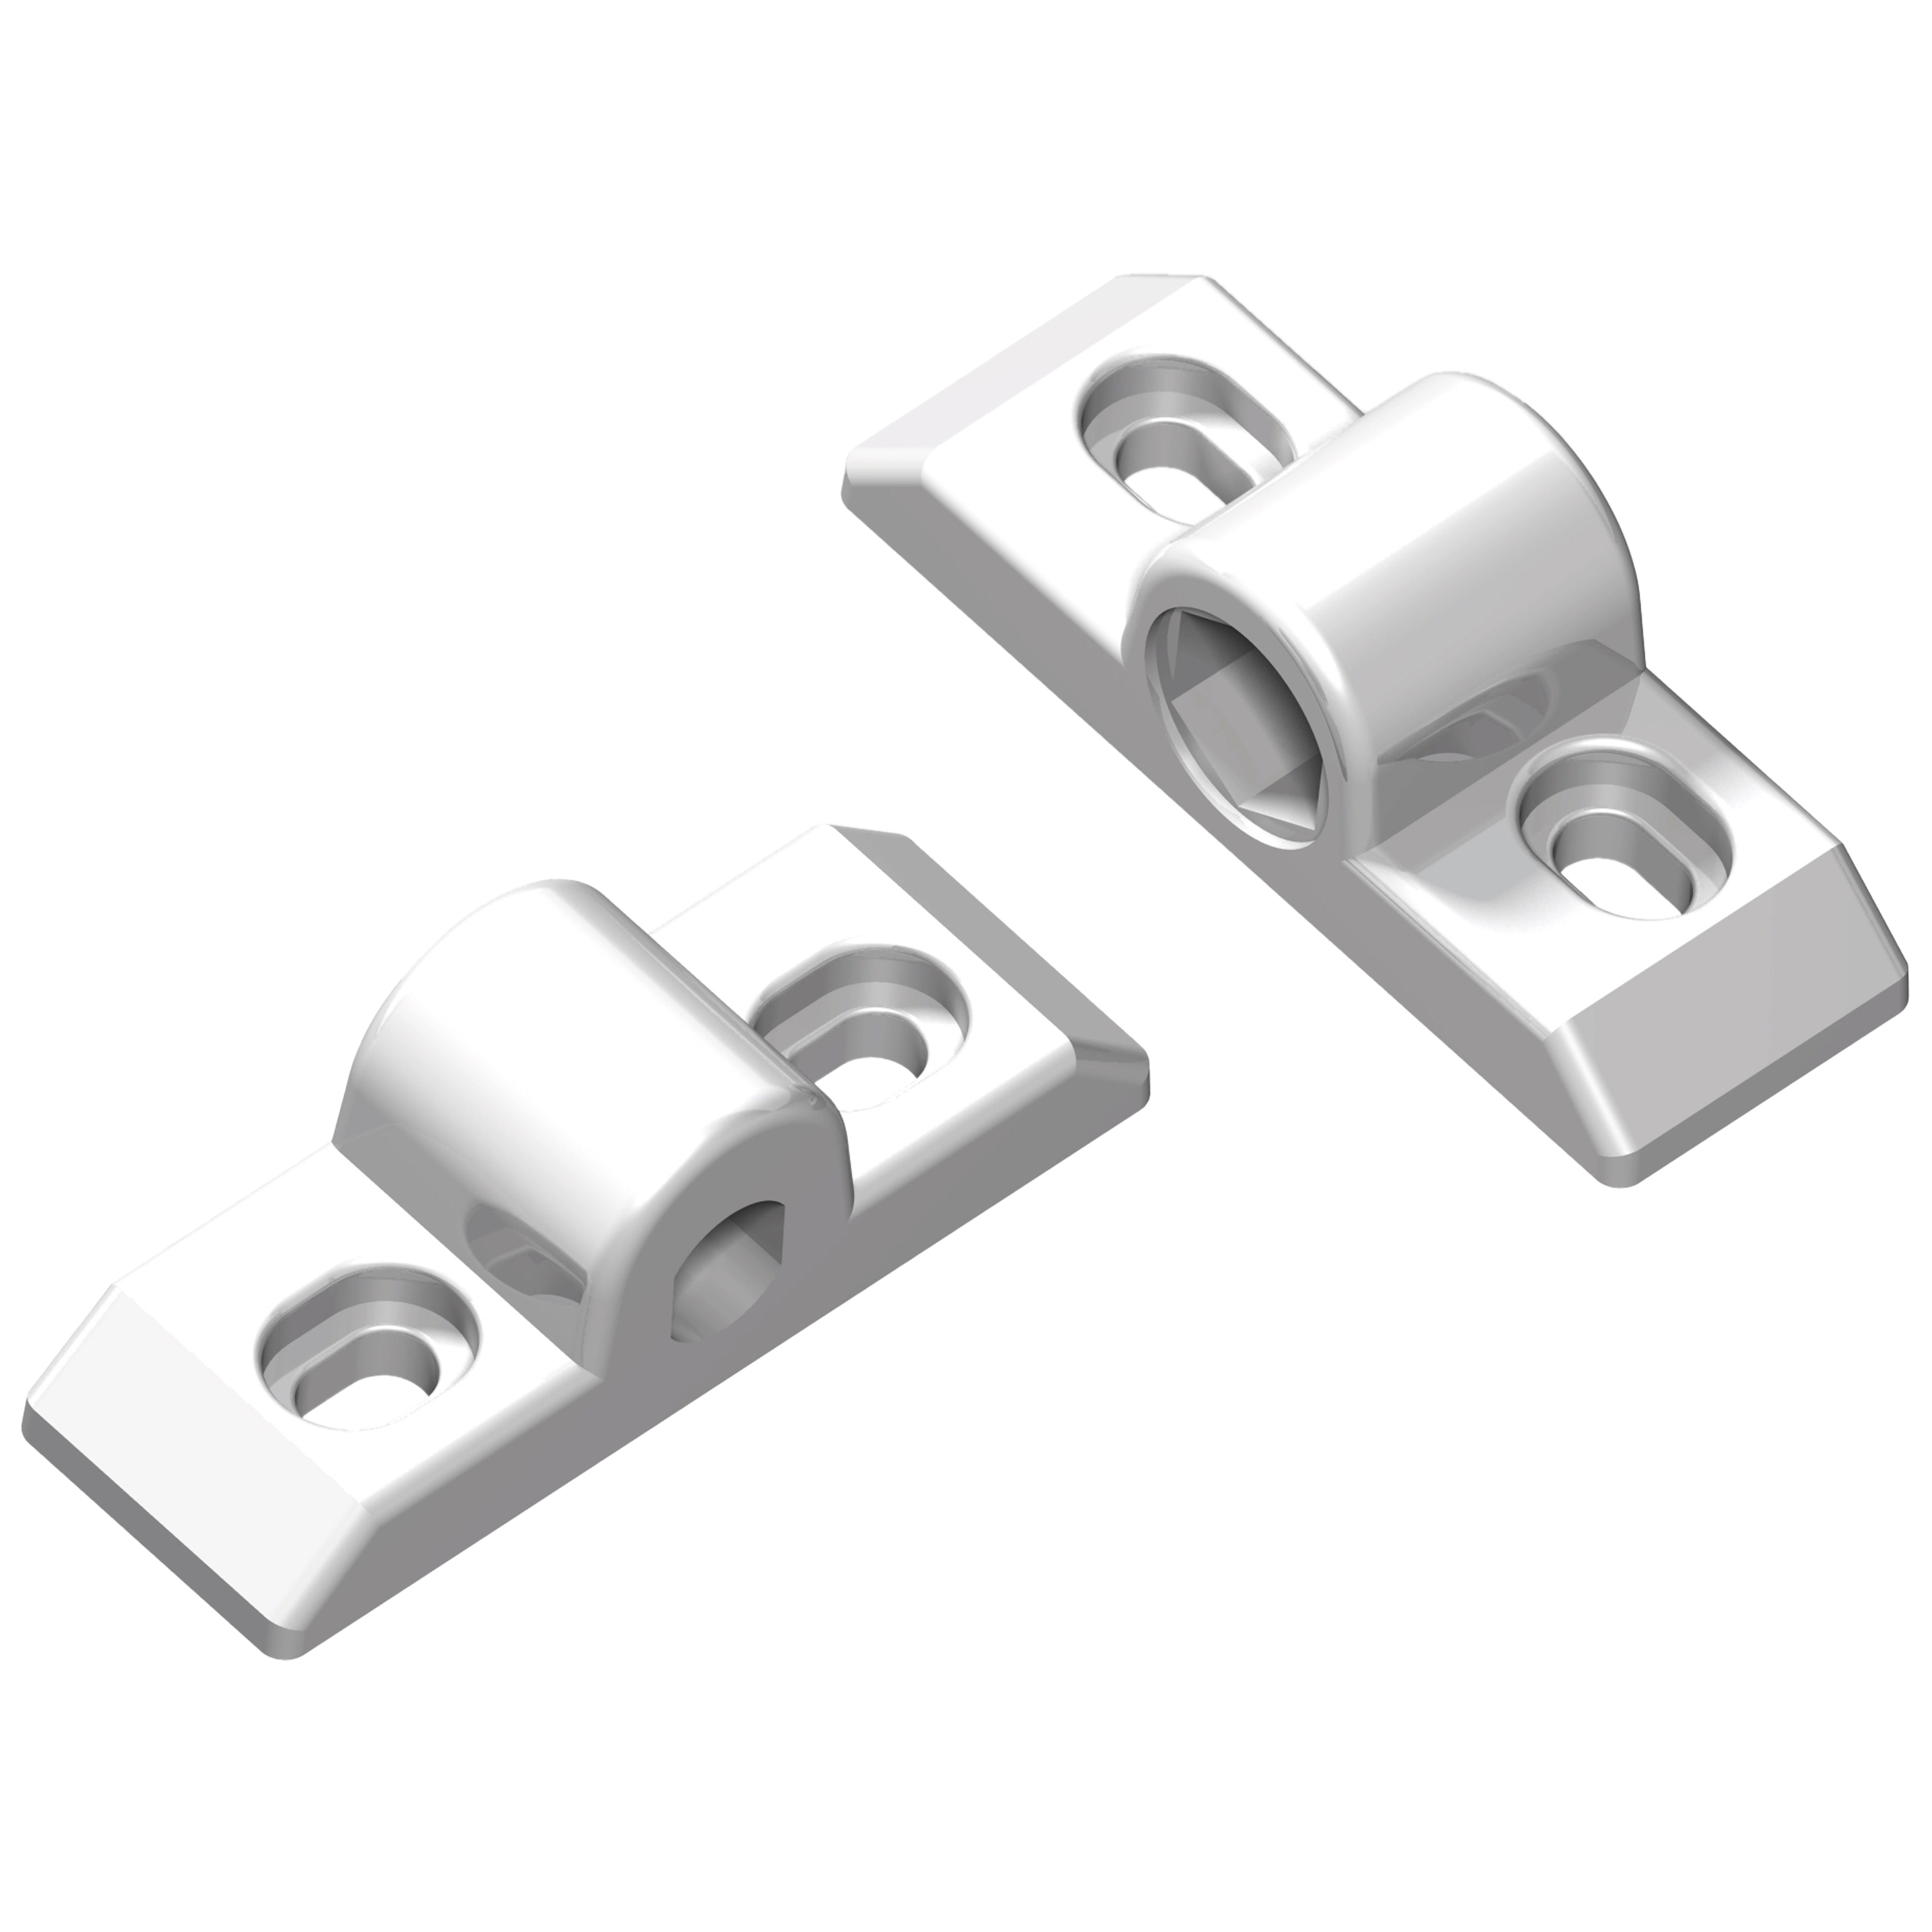 AB001 - ALUMINUM CELL CONNECTOR